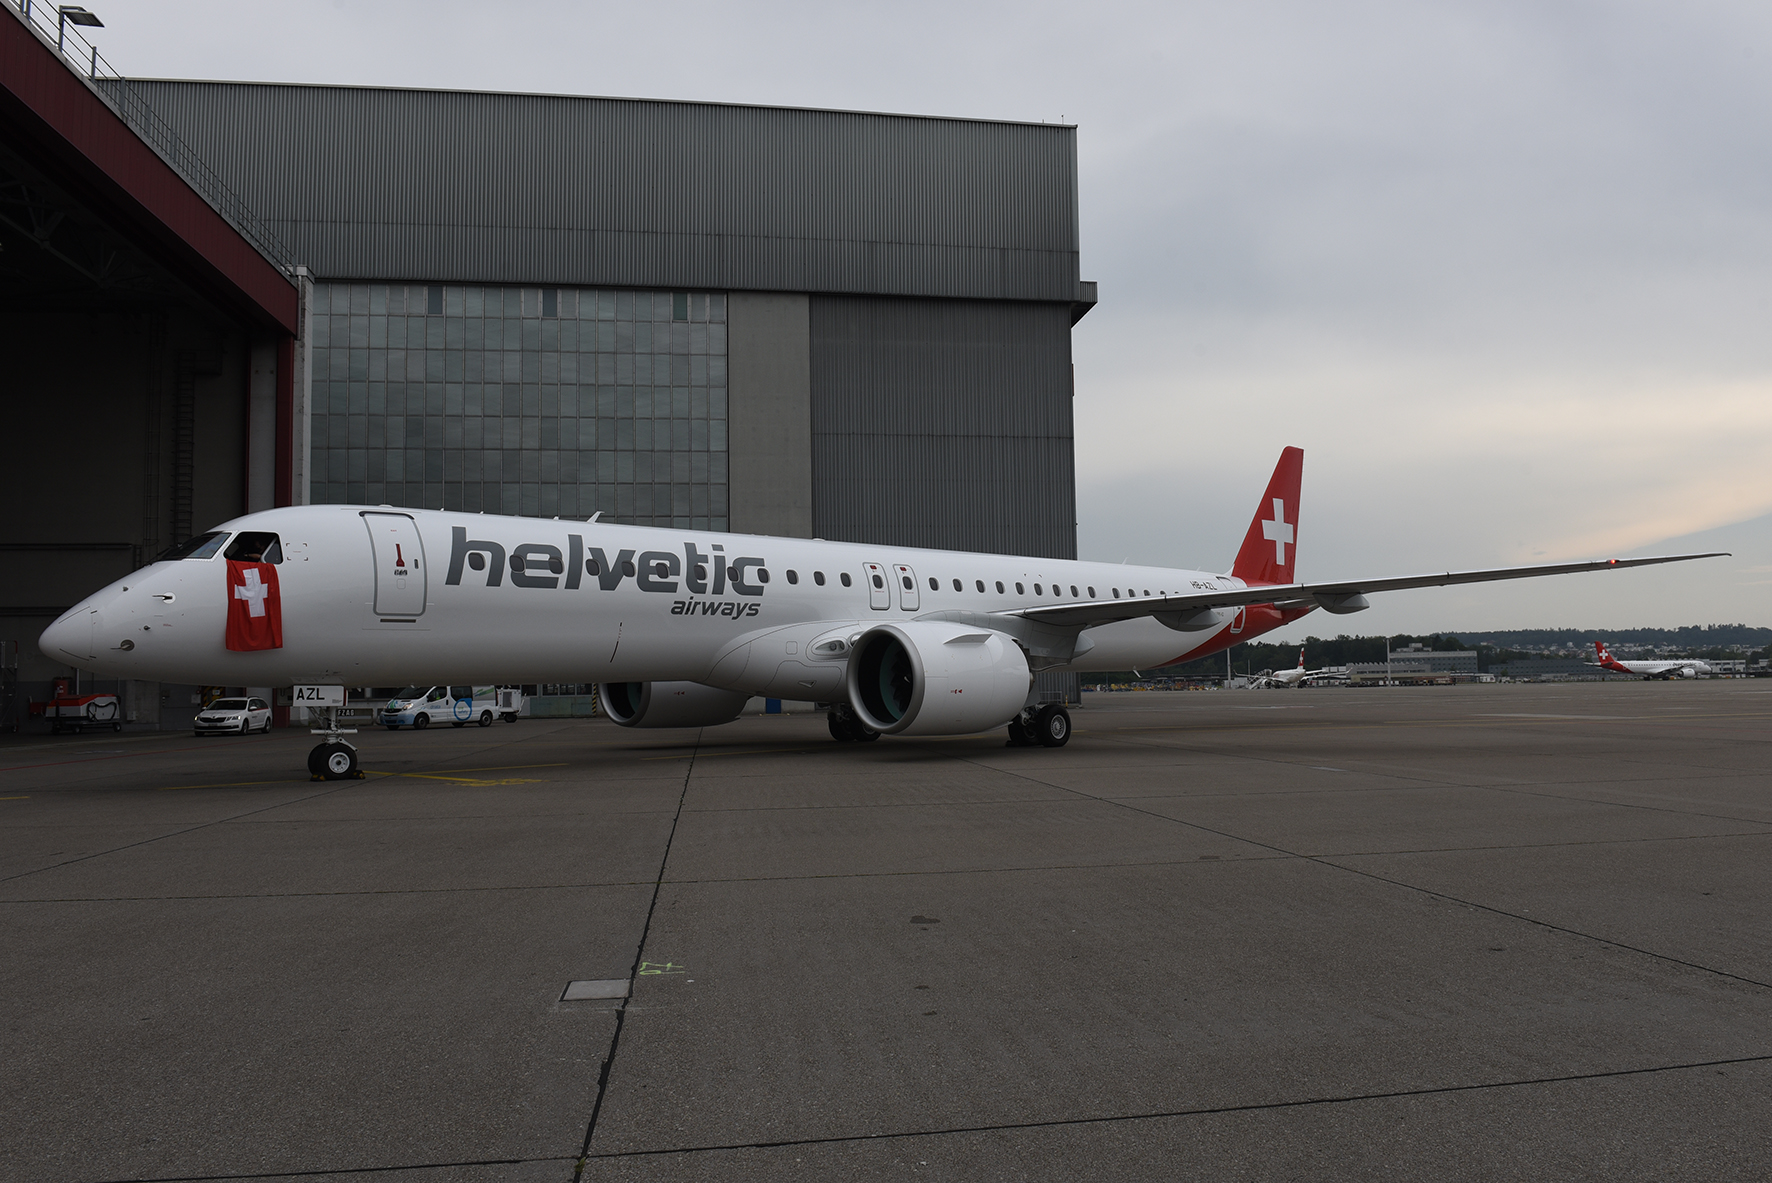 Helvetic Airways completes the renewal of its Embraer aircraft fleet